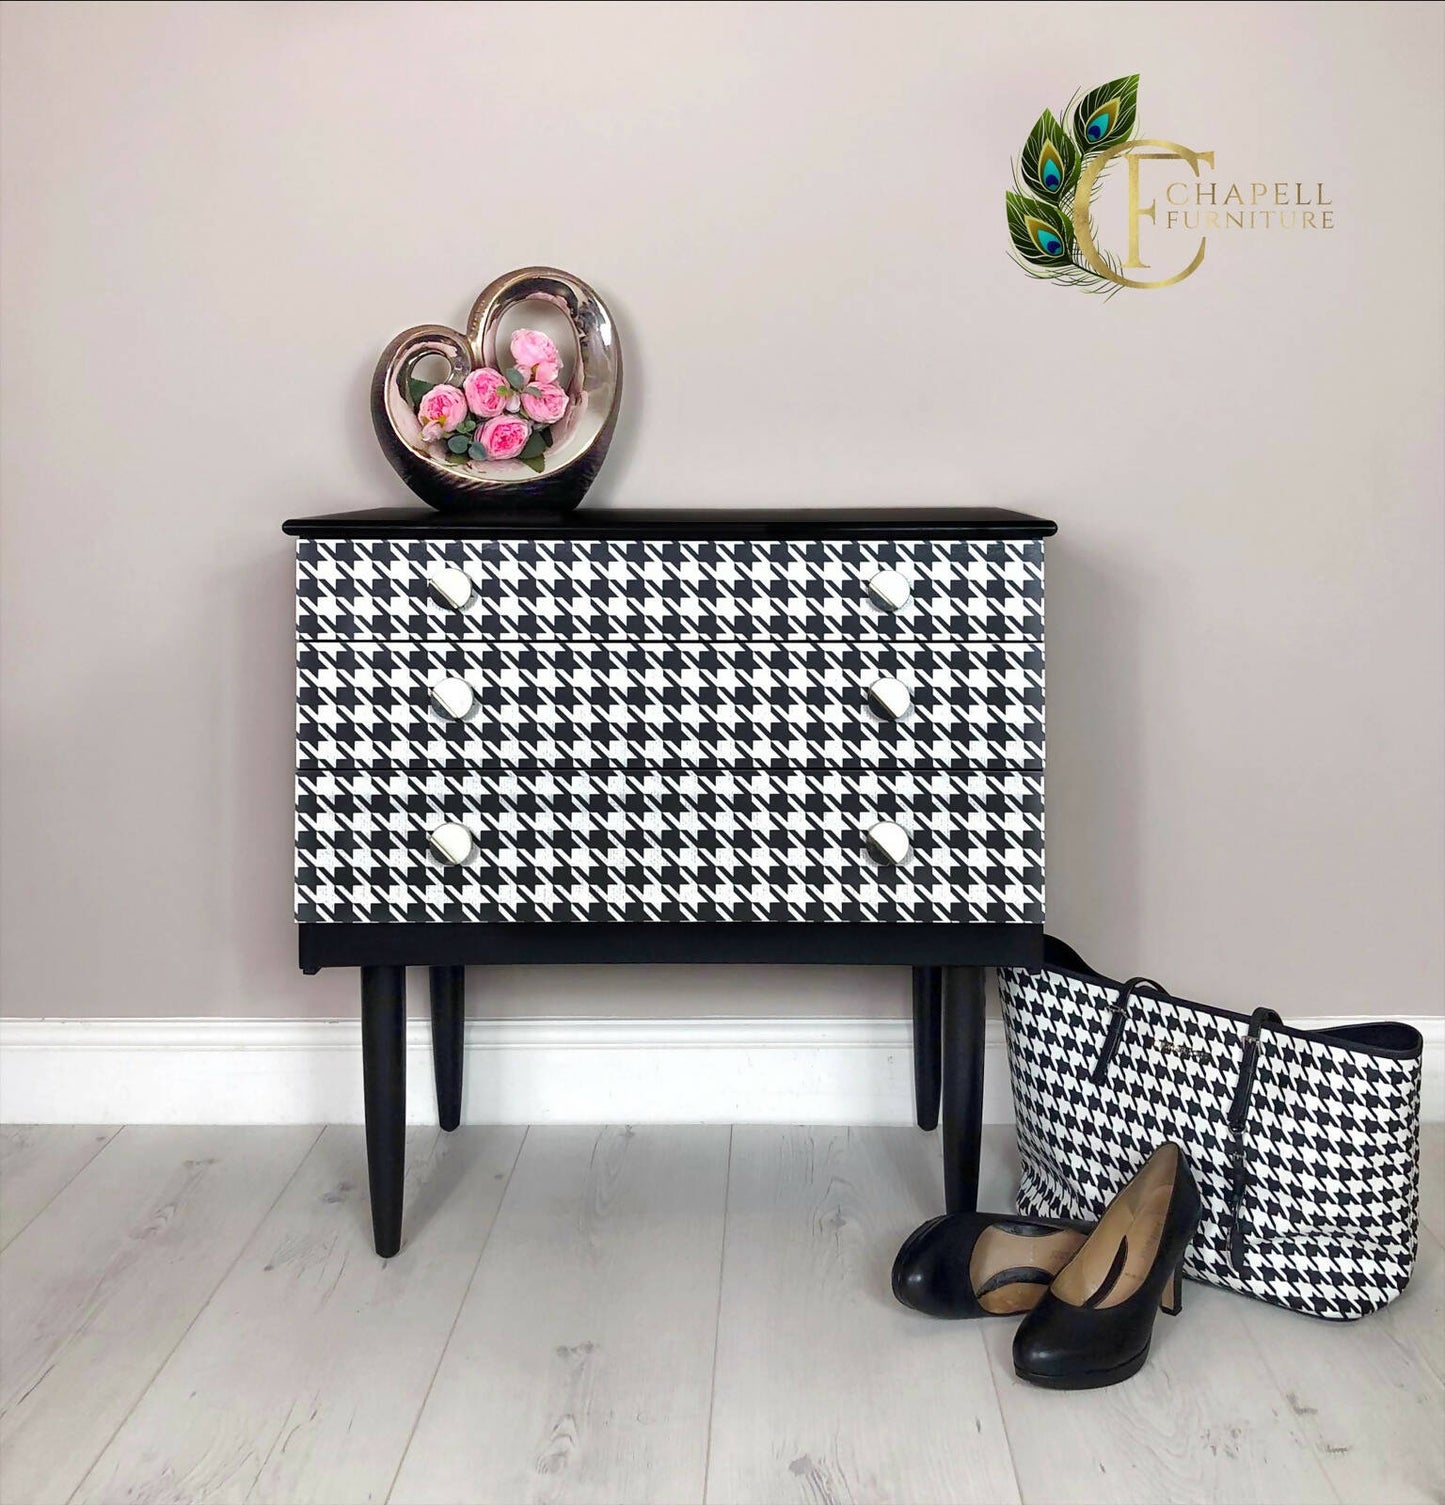 Schreiber Retro chest of 3 drawer/ Side table, Hand painted in black satin colour, Decoupaged with dogtooth pattern/ Marble handles